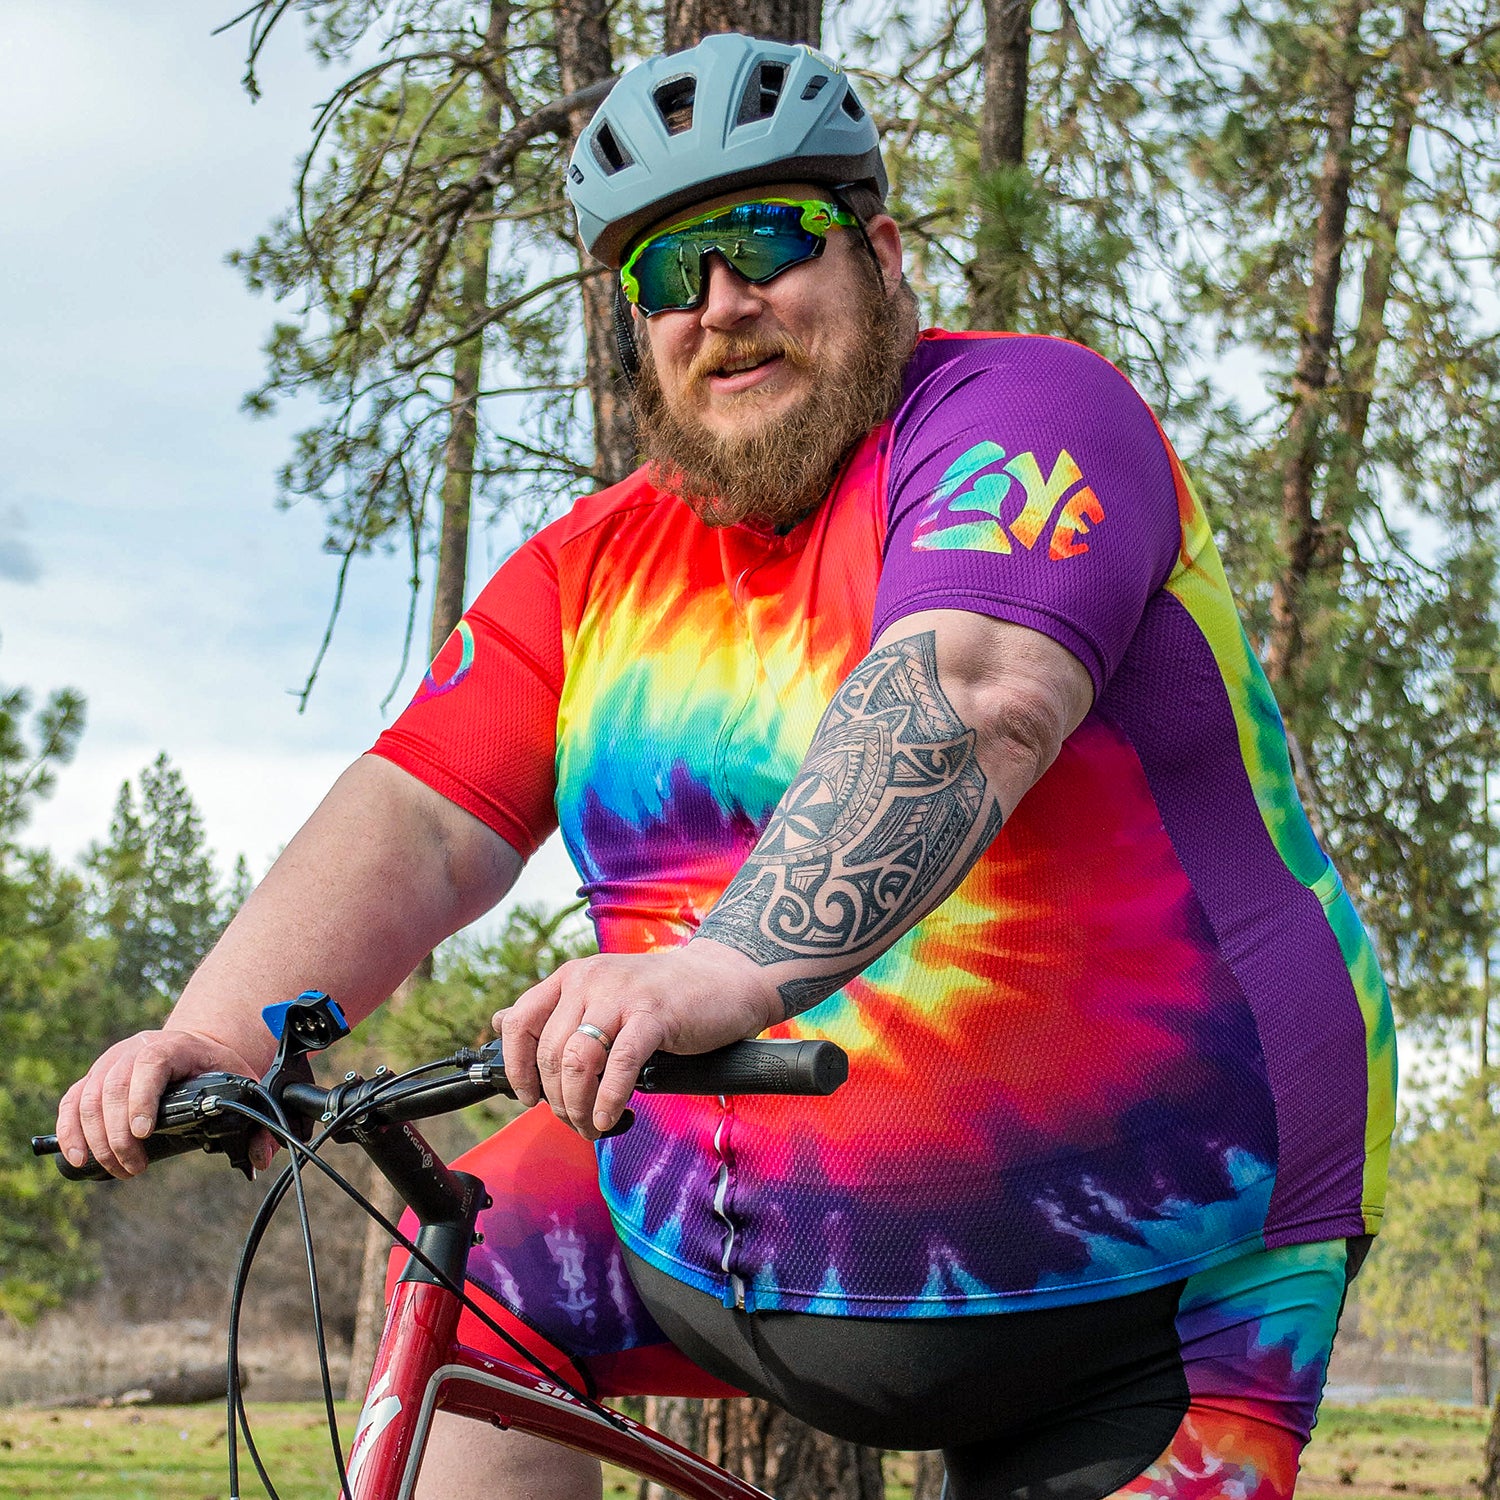 Men's Tie Dye Short Sleeve Cycling Jersey Only - Exclusive to XL by OCG